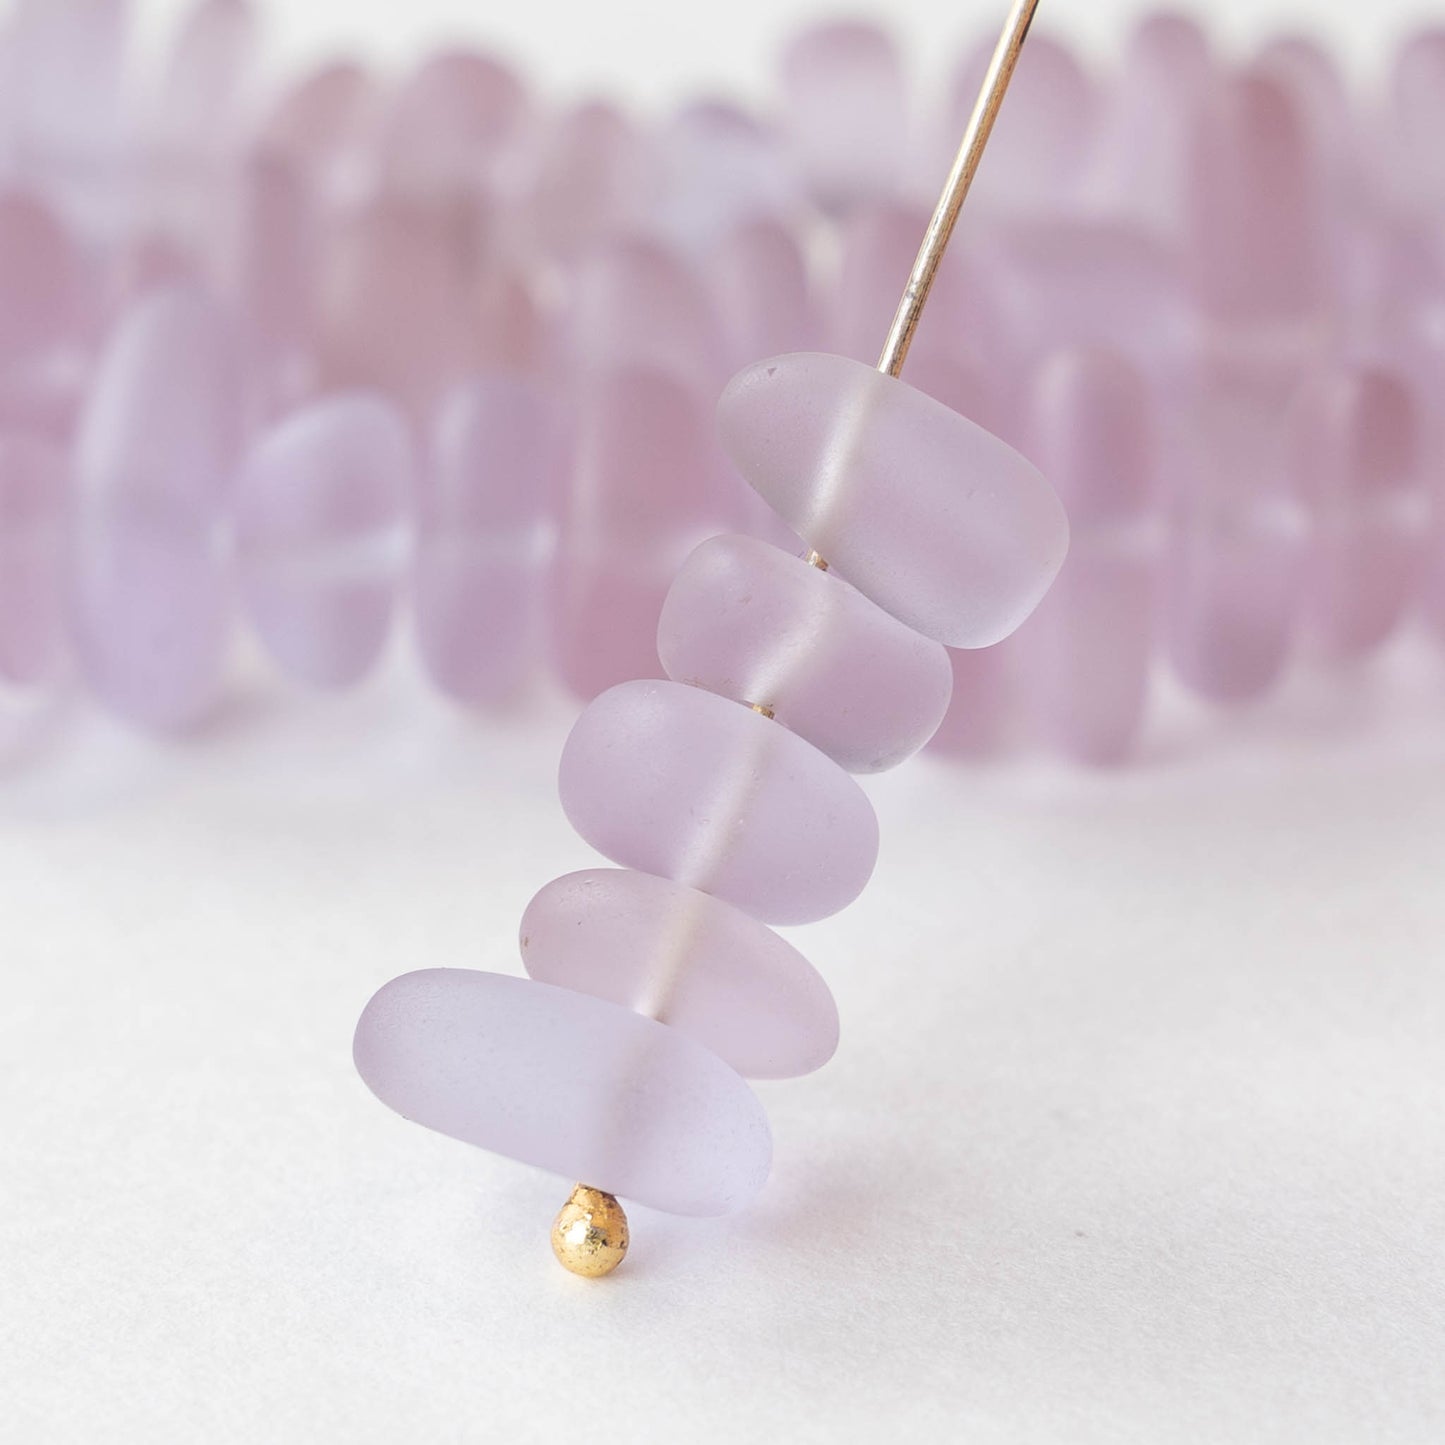 Frosted Glass Pebbles - Lilac - 50 Beads